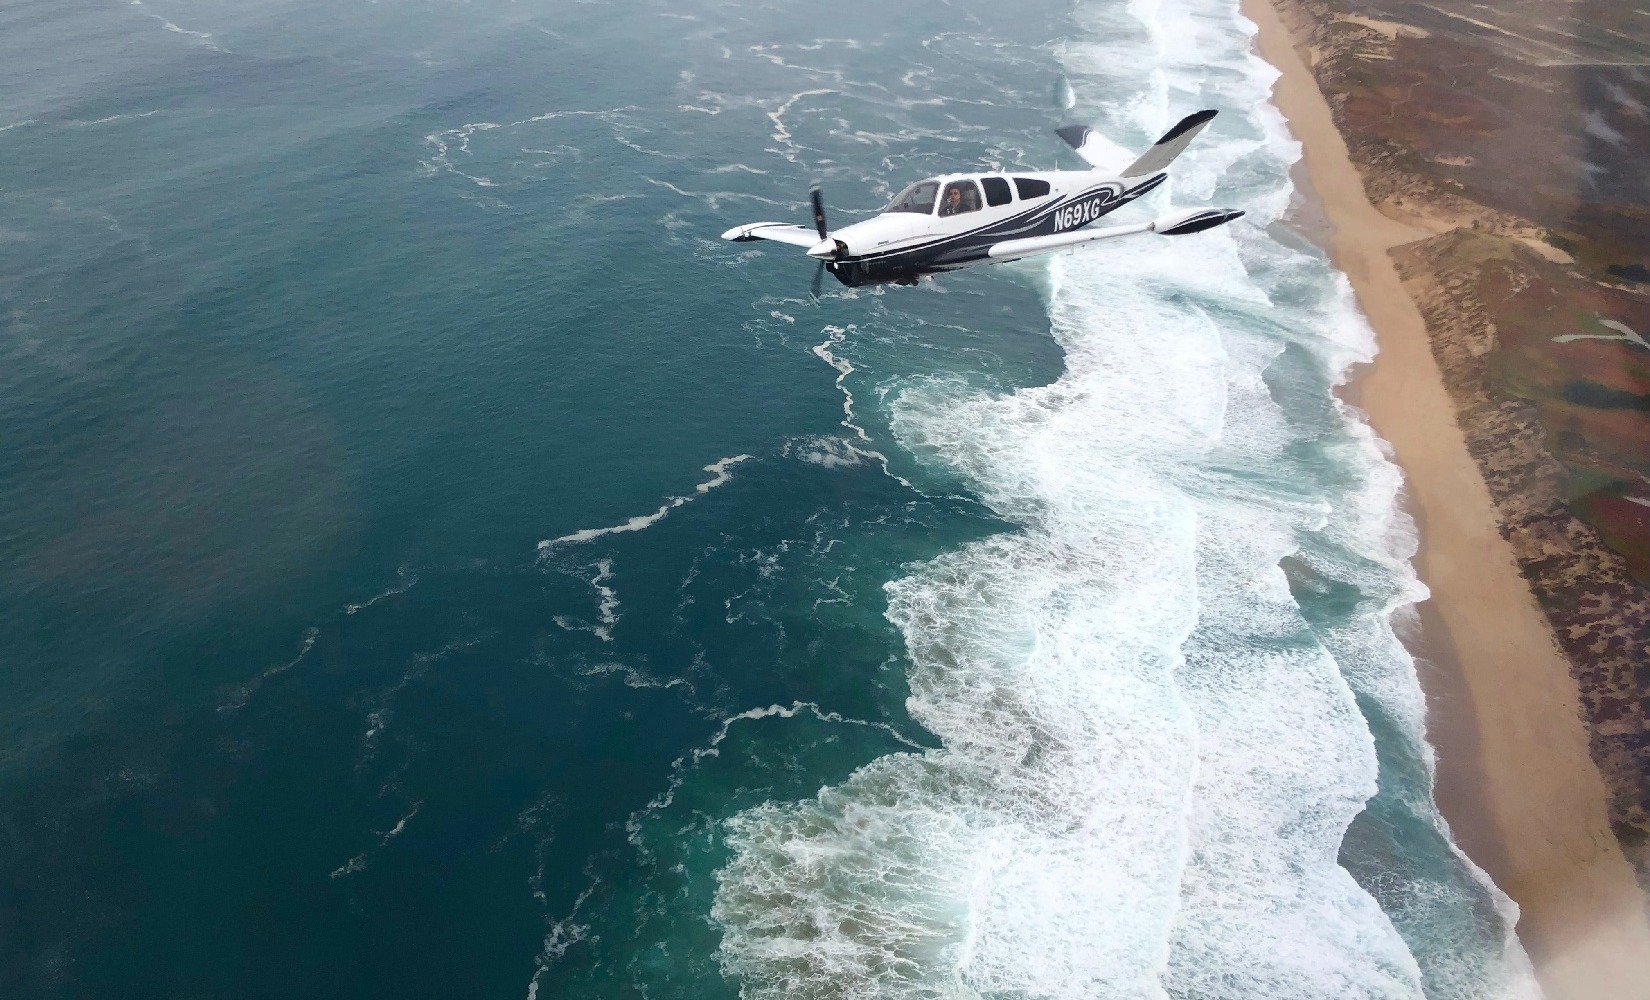 Flying a Beechcraft airplane over the coastline